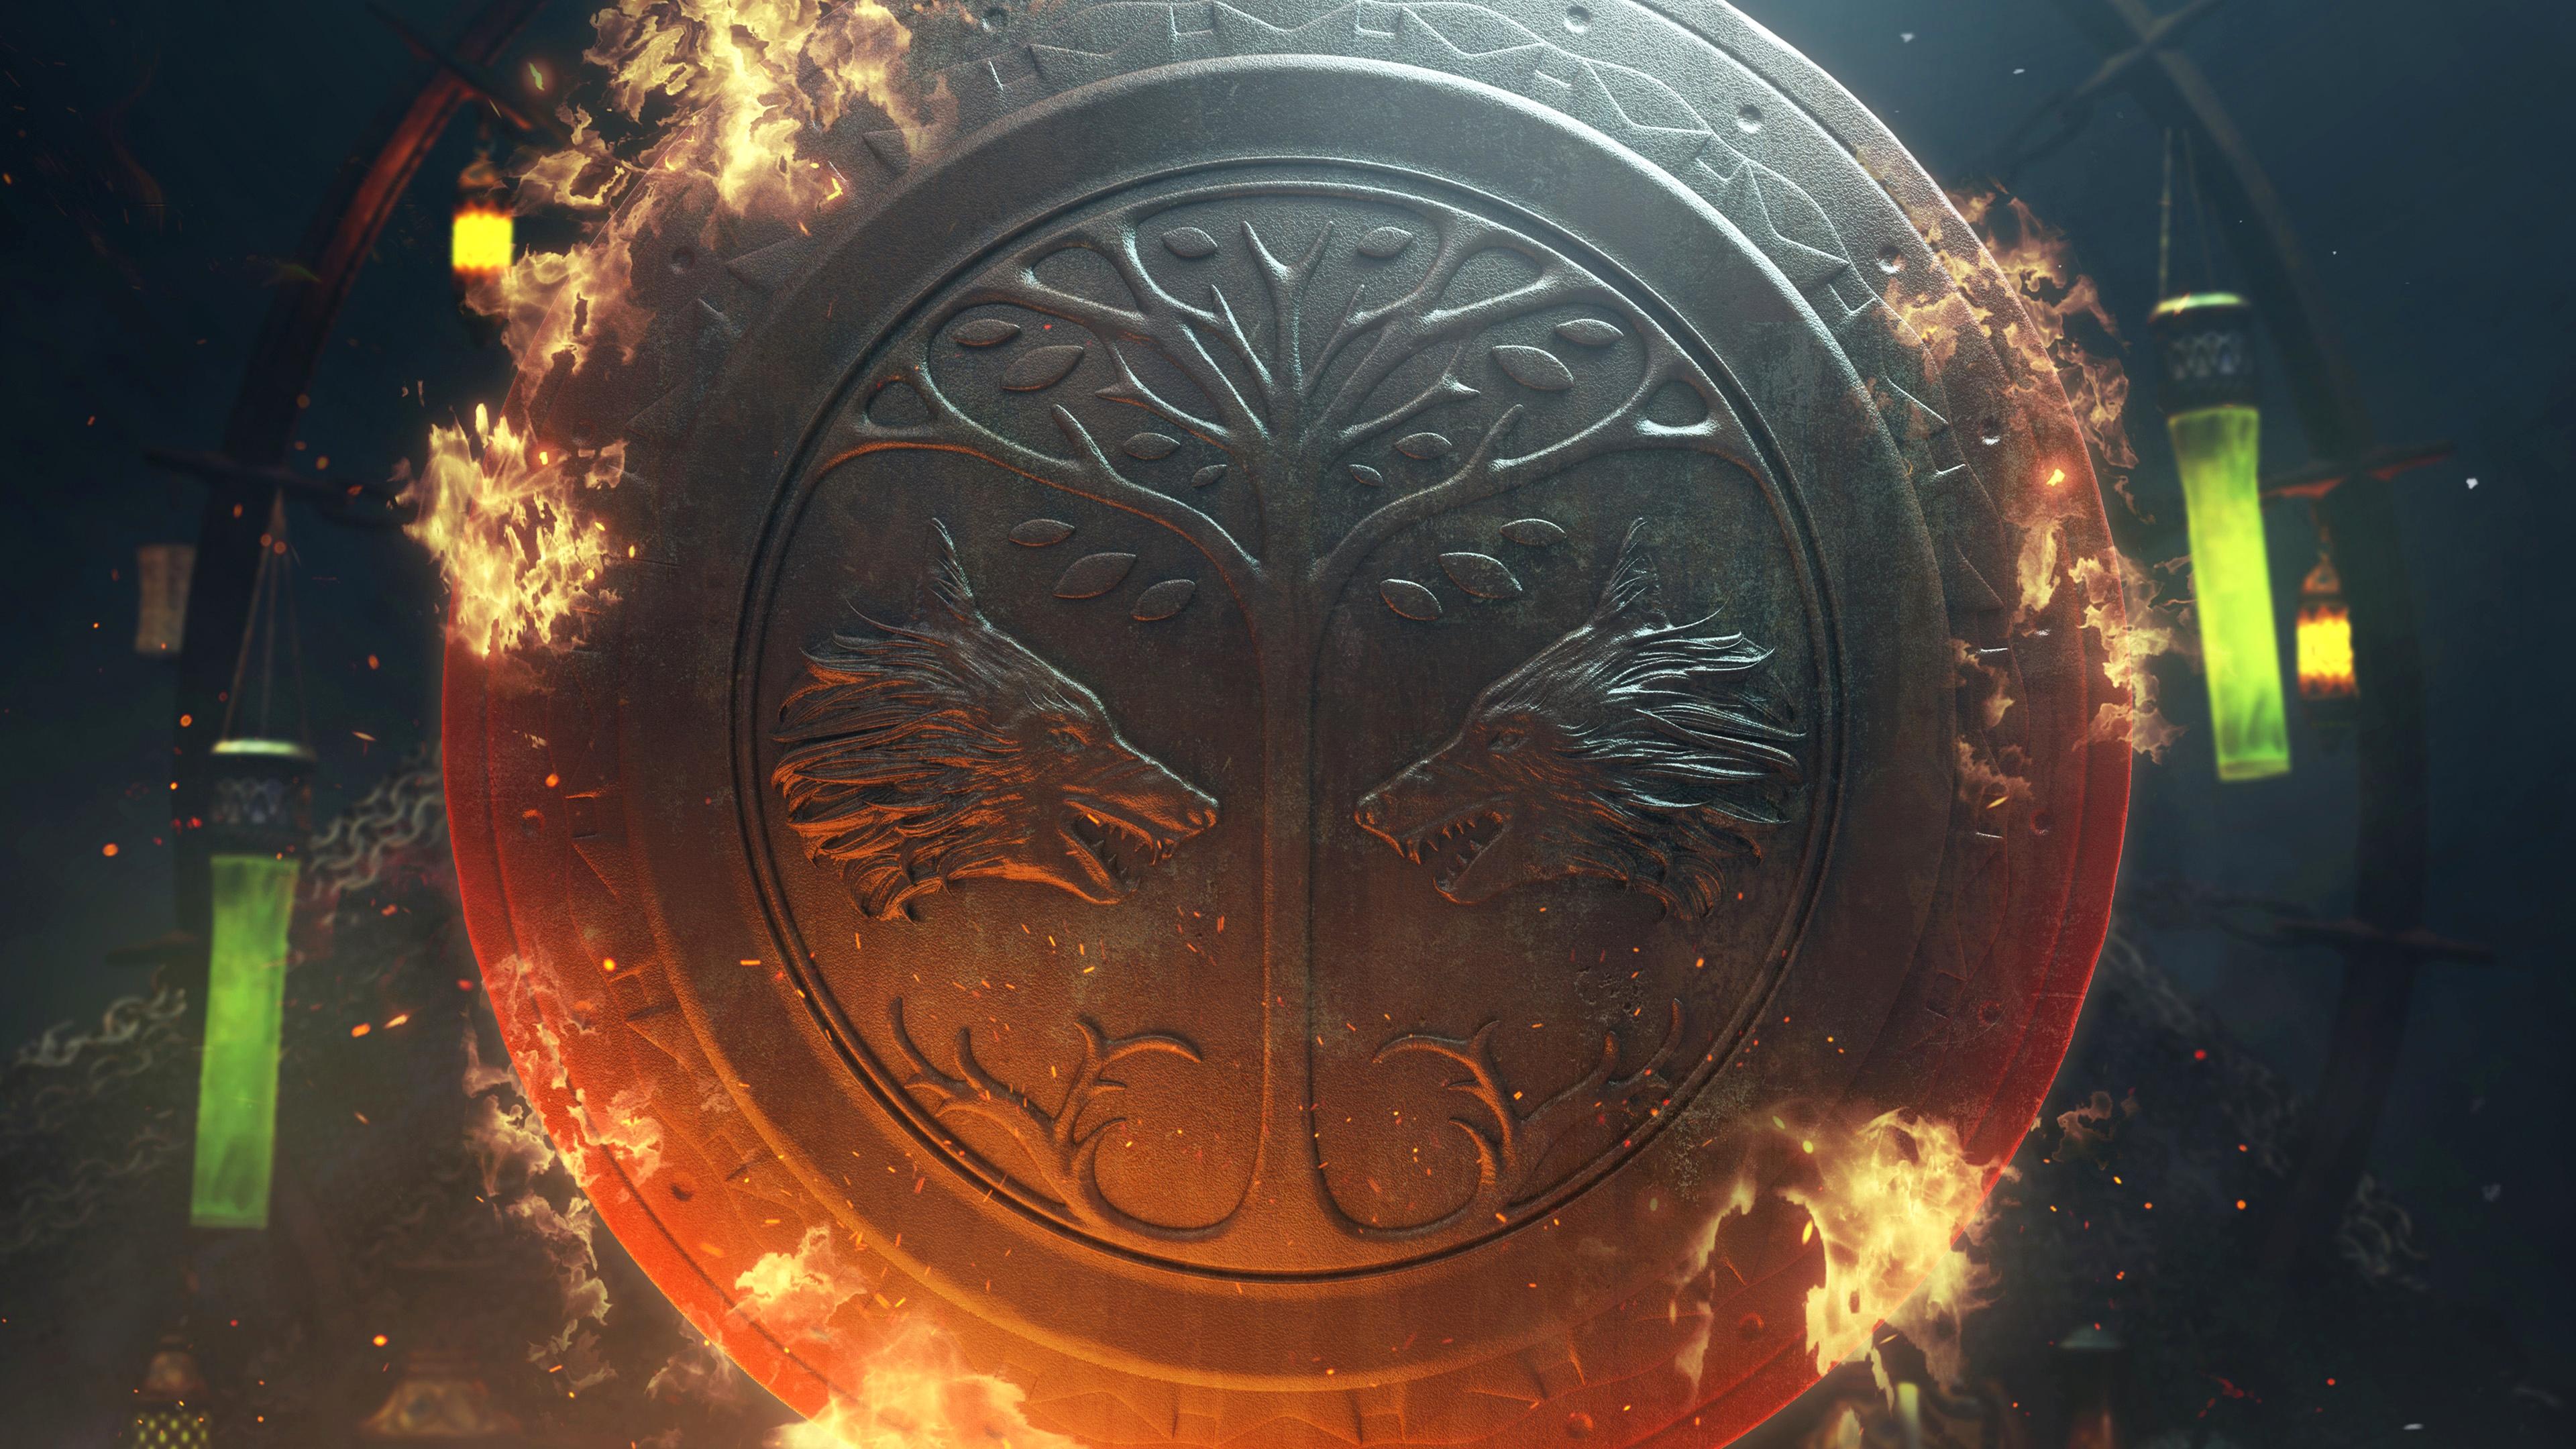 Destiny 2 Iron Banner logo seen in The Tower.